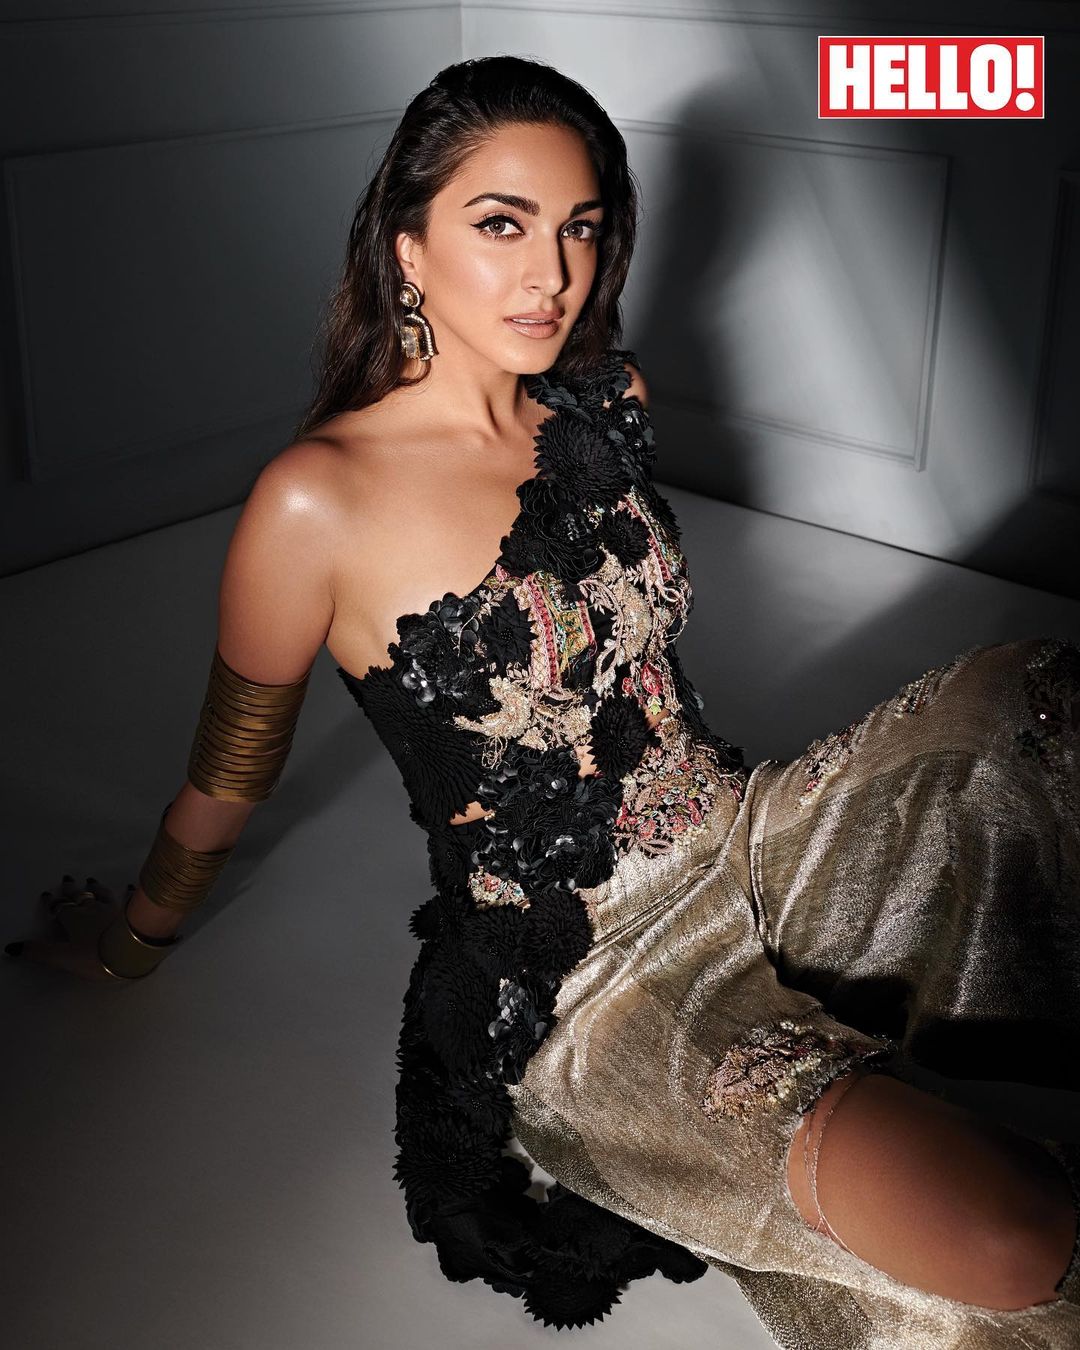 Kiara Advani looks sultry in the floral asymmetrical top and ripped pants